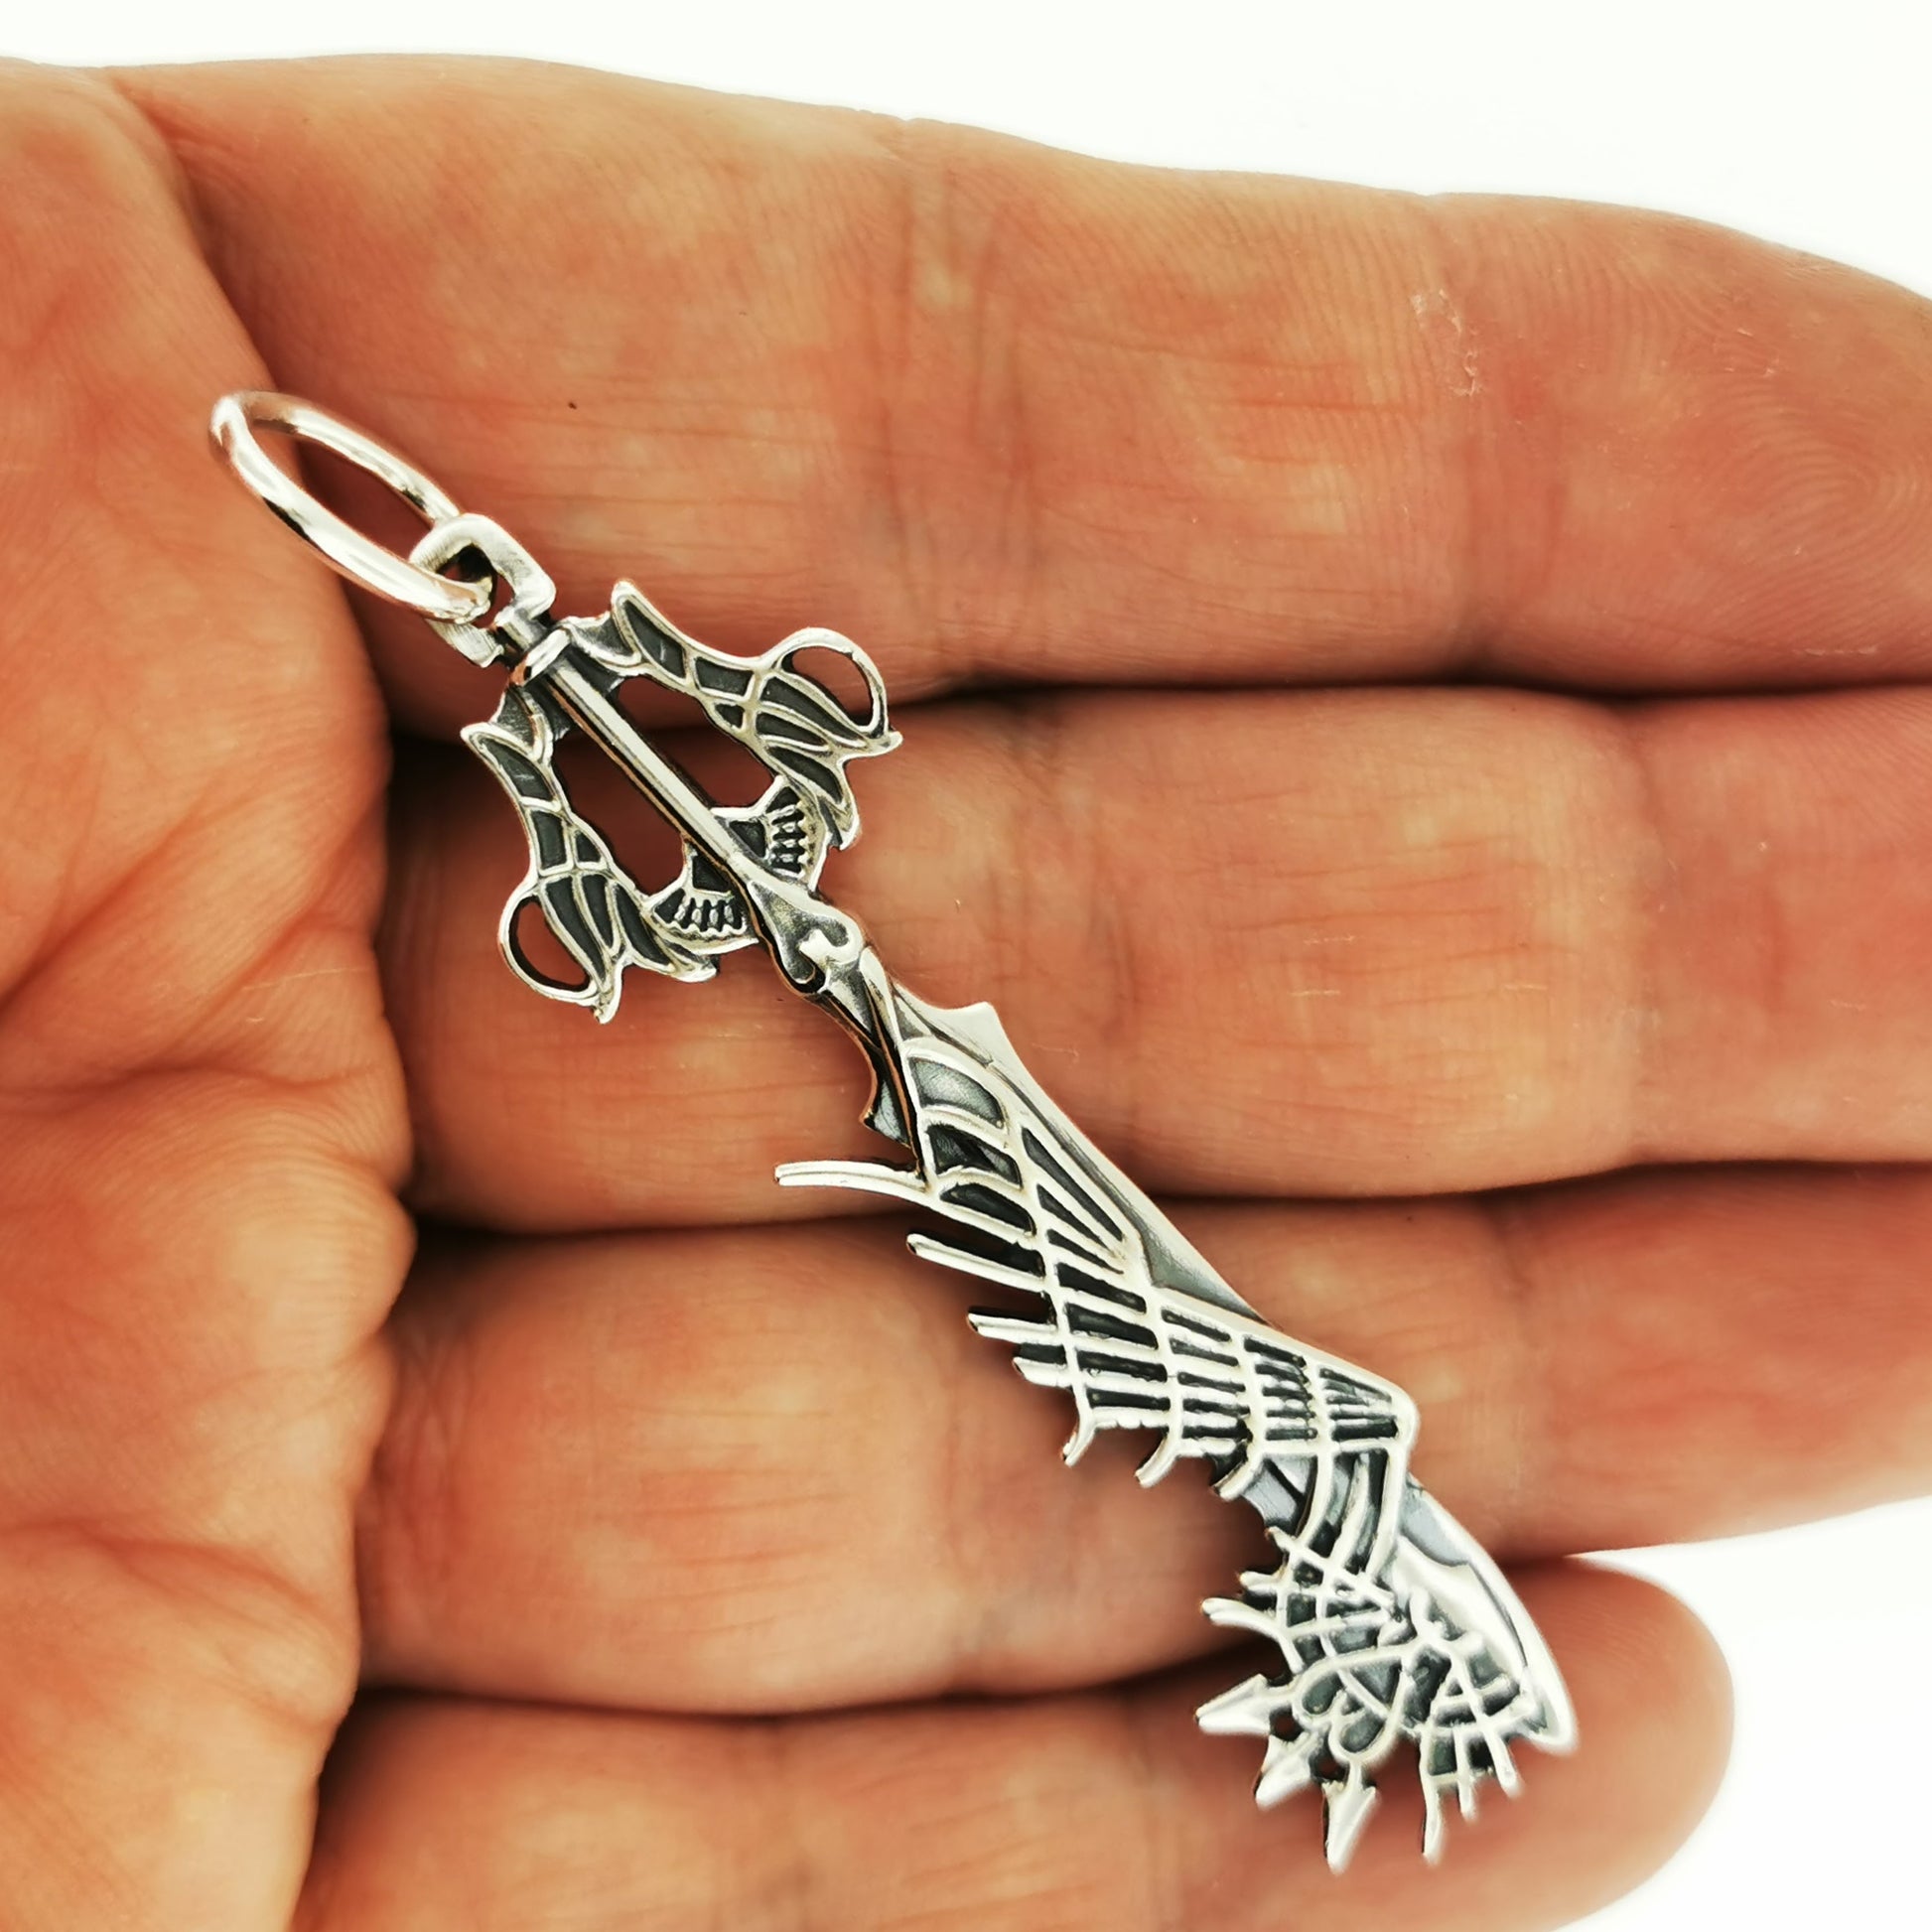 Kingdom Hearts Ultima Keyblade Pendant in Sterling Silver or Antique Bronze, Video Game Jewelry, Video Game Jewellery, Silver Video Game Pendant, Bronze Video Game Pendant, Gamer Girl Pendant, Gamer Girl Jewelry, Gamer Girl Jewellry, Gamer Geek Pendant, Gamer Geek Jewelry, KH Keyblade Pendant, Silver Keyblade Pendant, Bronze Keyblade Pendant, Ultima Keyblade Pendant, 925 Silver Keyblade, Kingdom Hearts Keyblade Pendant